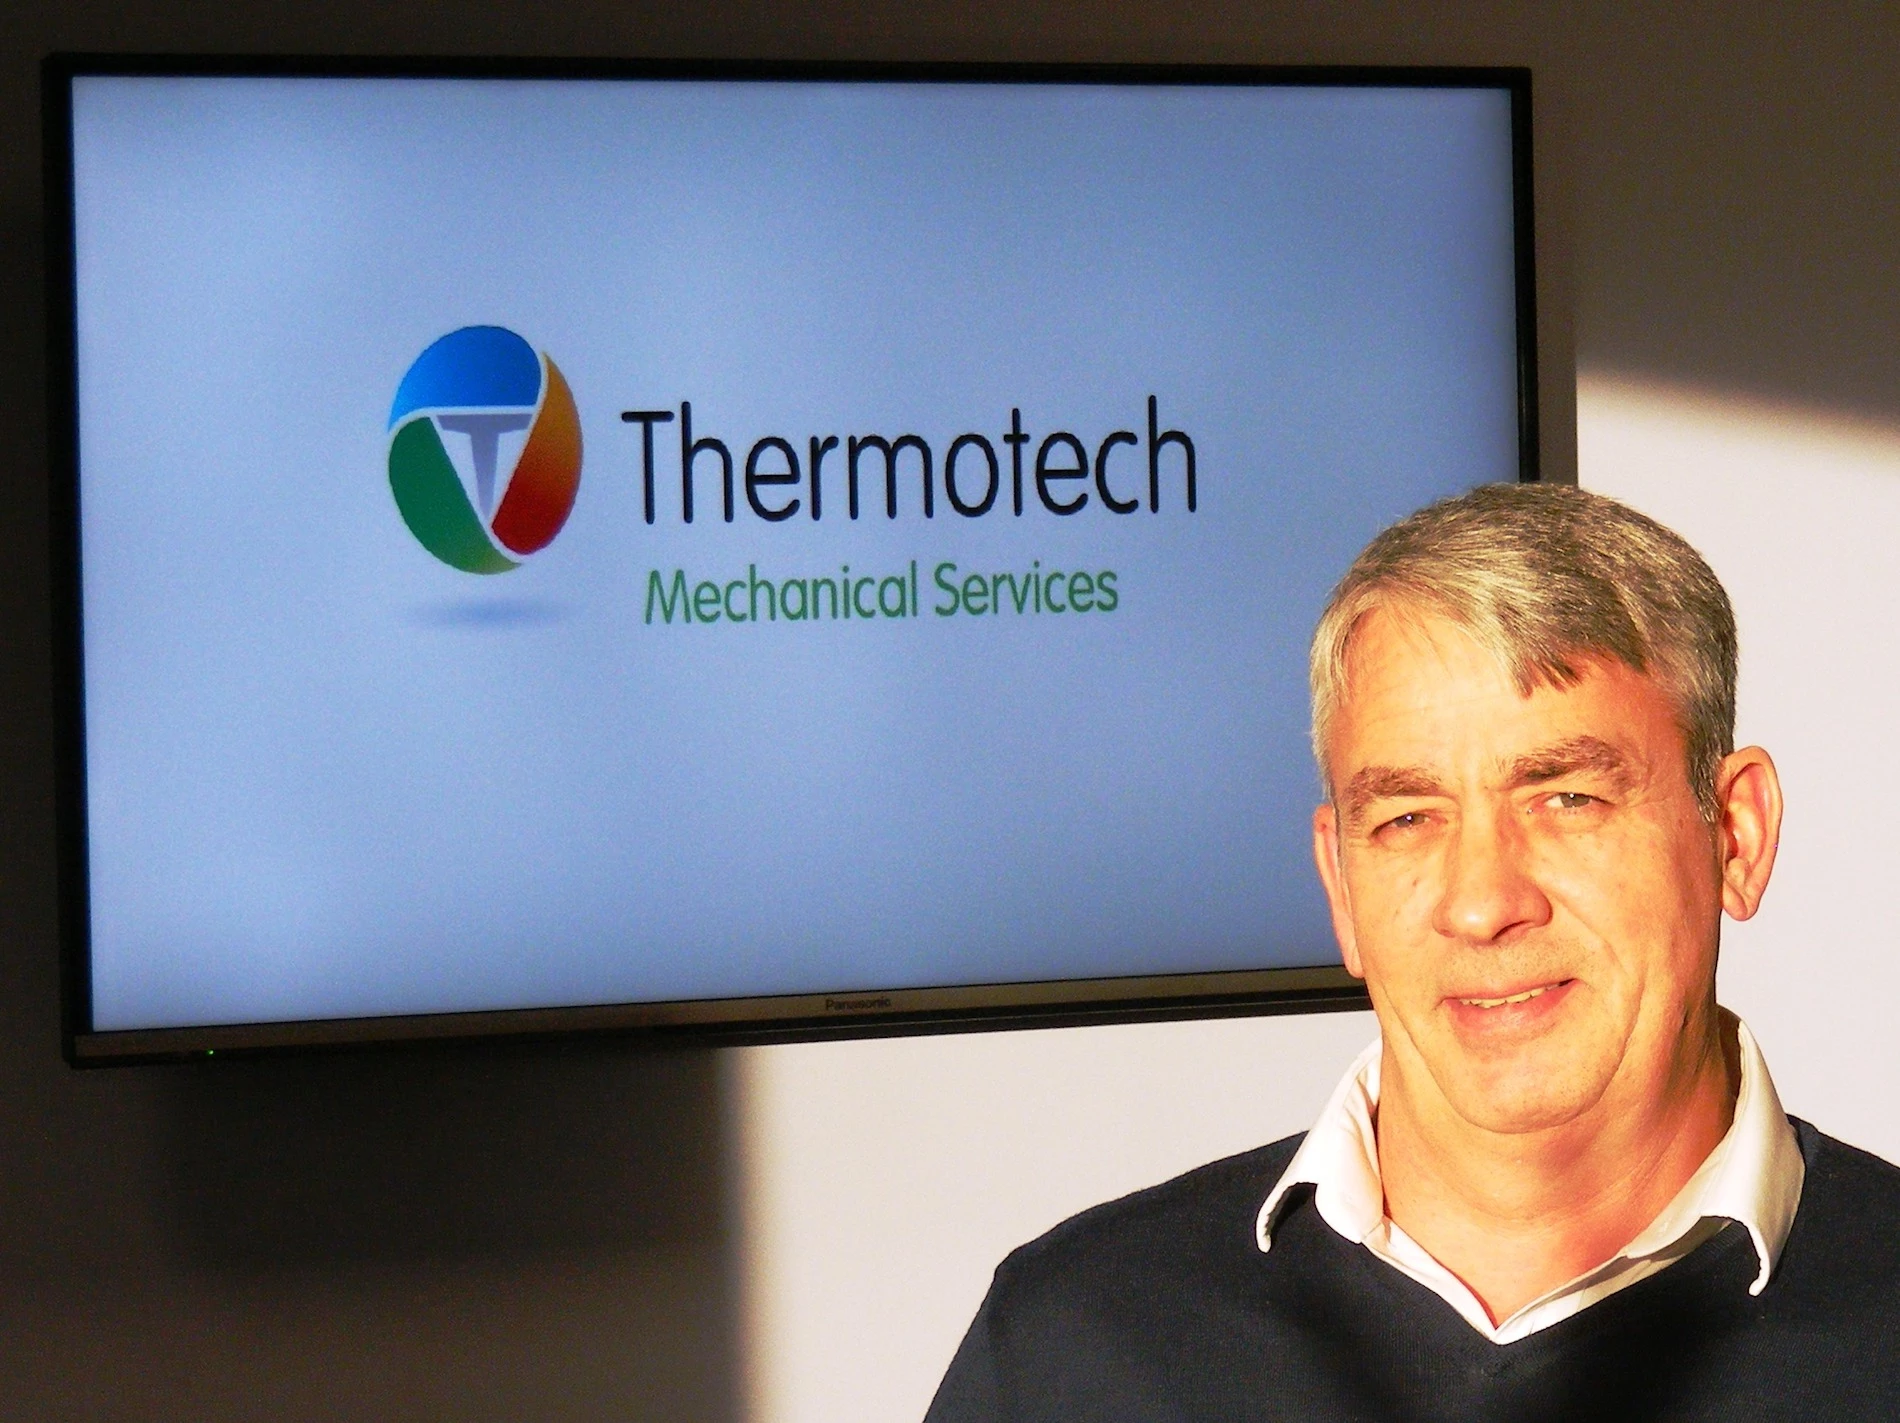 Dave Prendergast, managing director of Thermotech